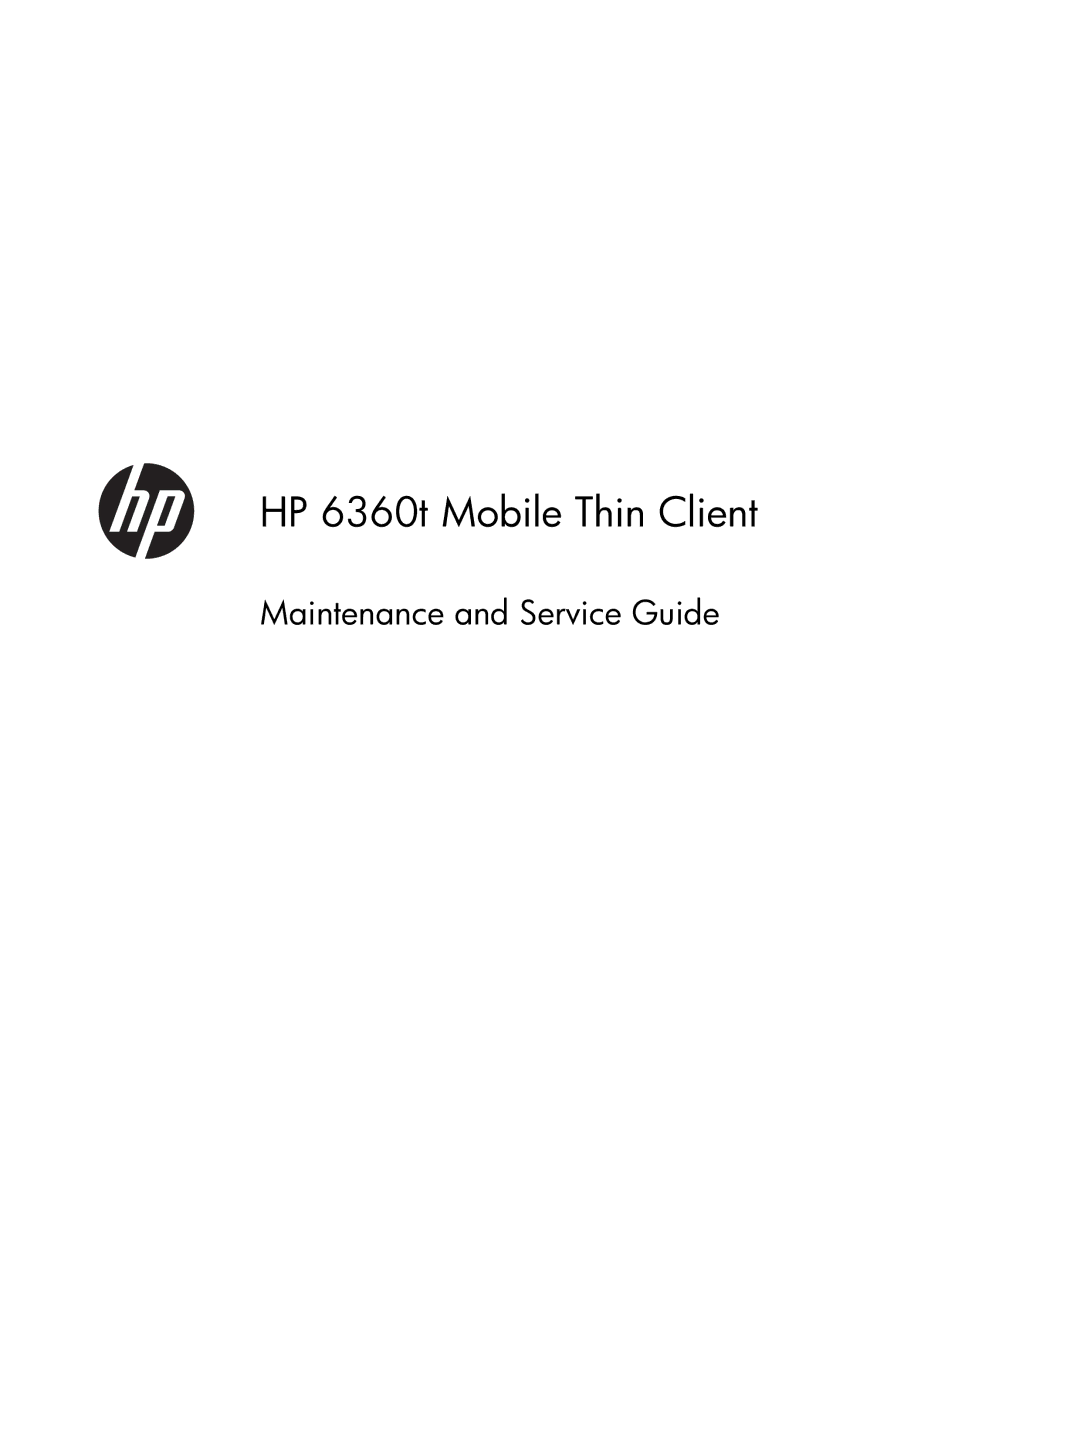 HP manual HP 6360t Mobile Thin Client 